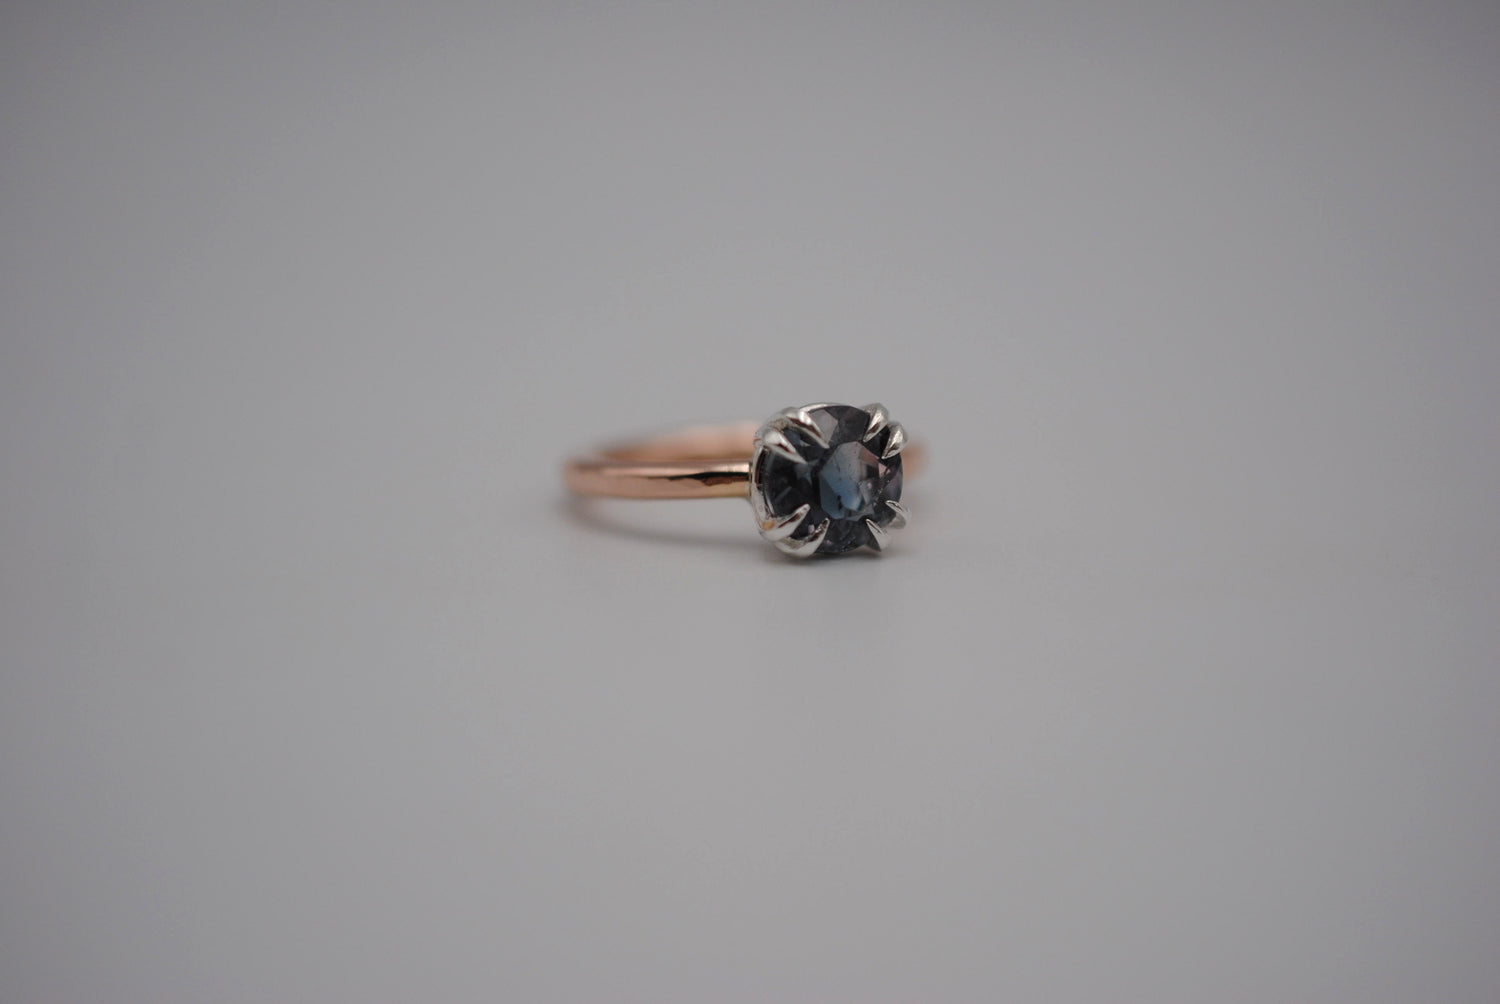 A blue tourmaline ring with double silver prongs on a rose gold band.